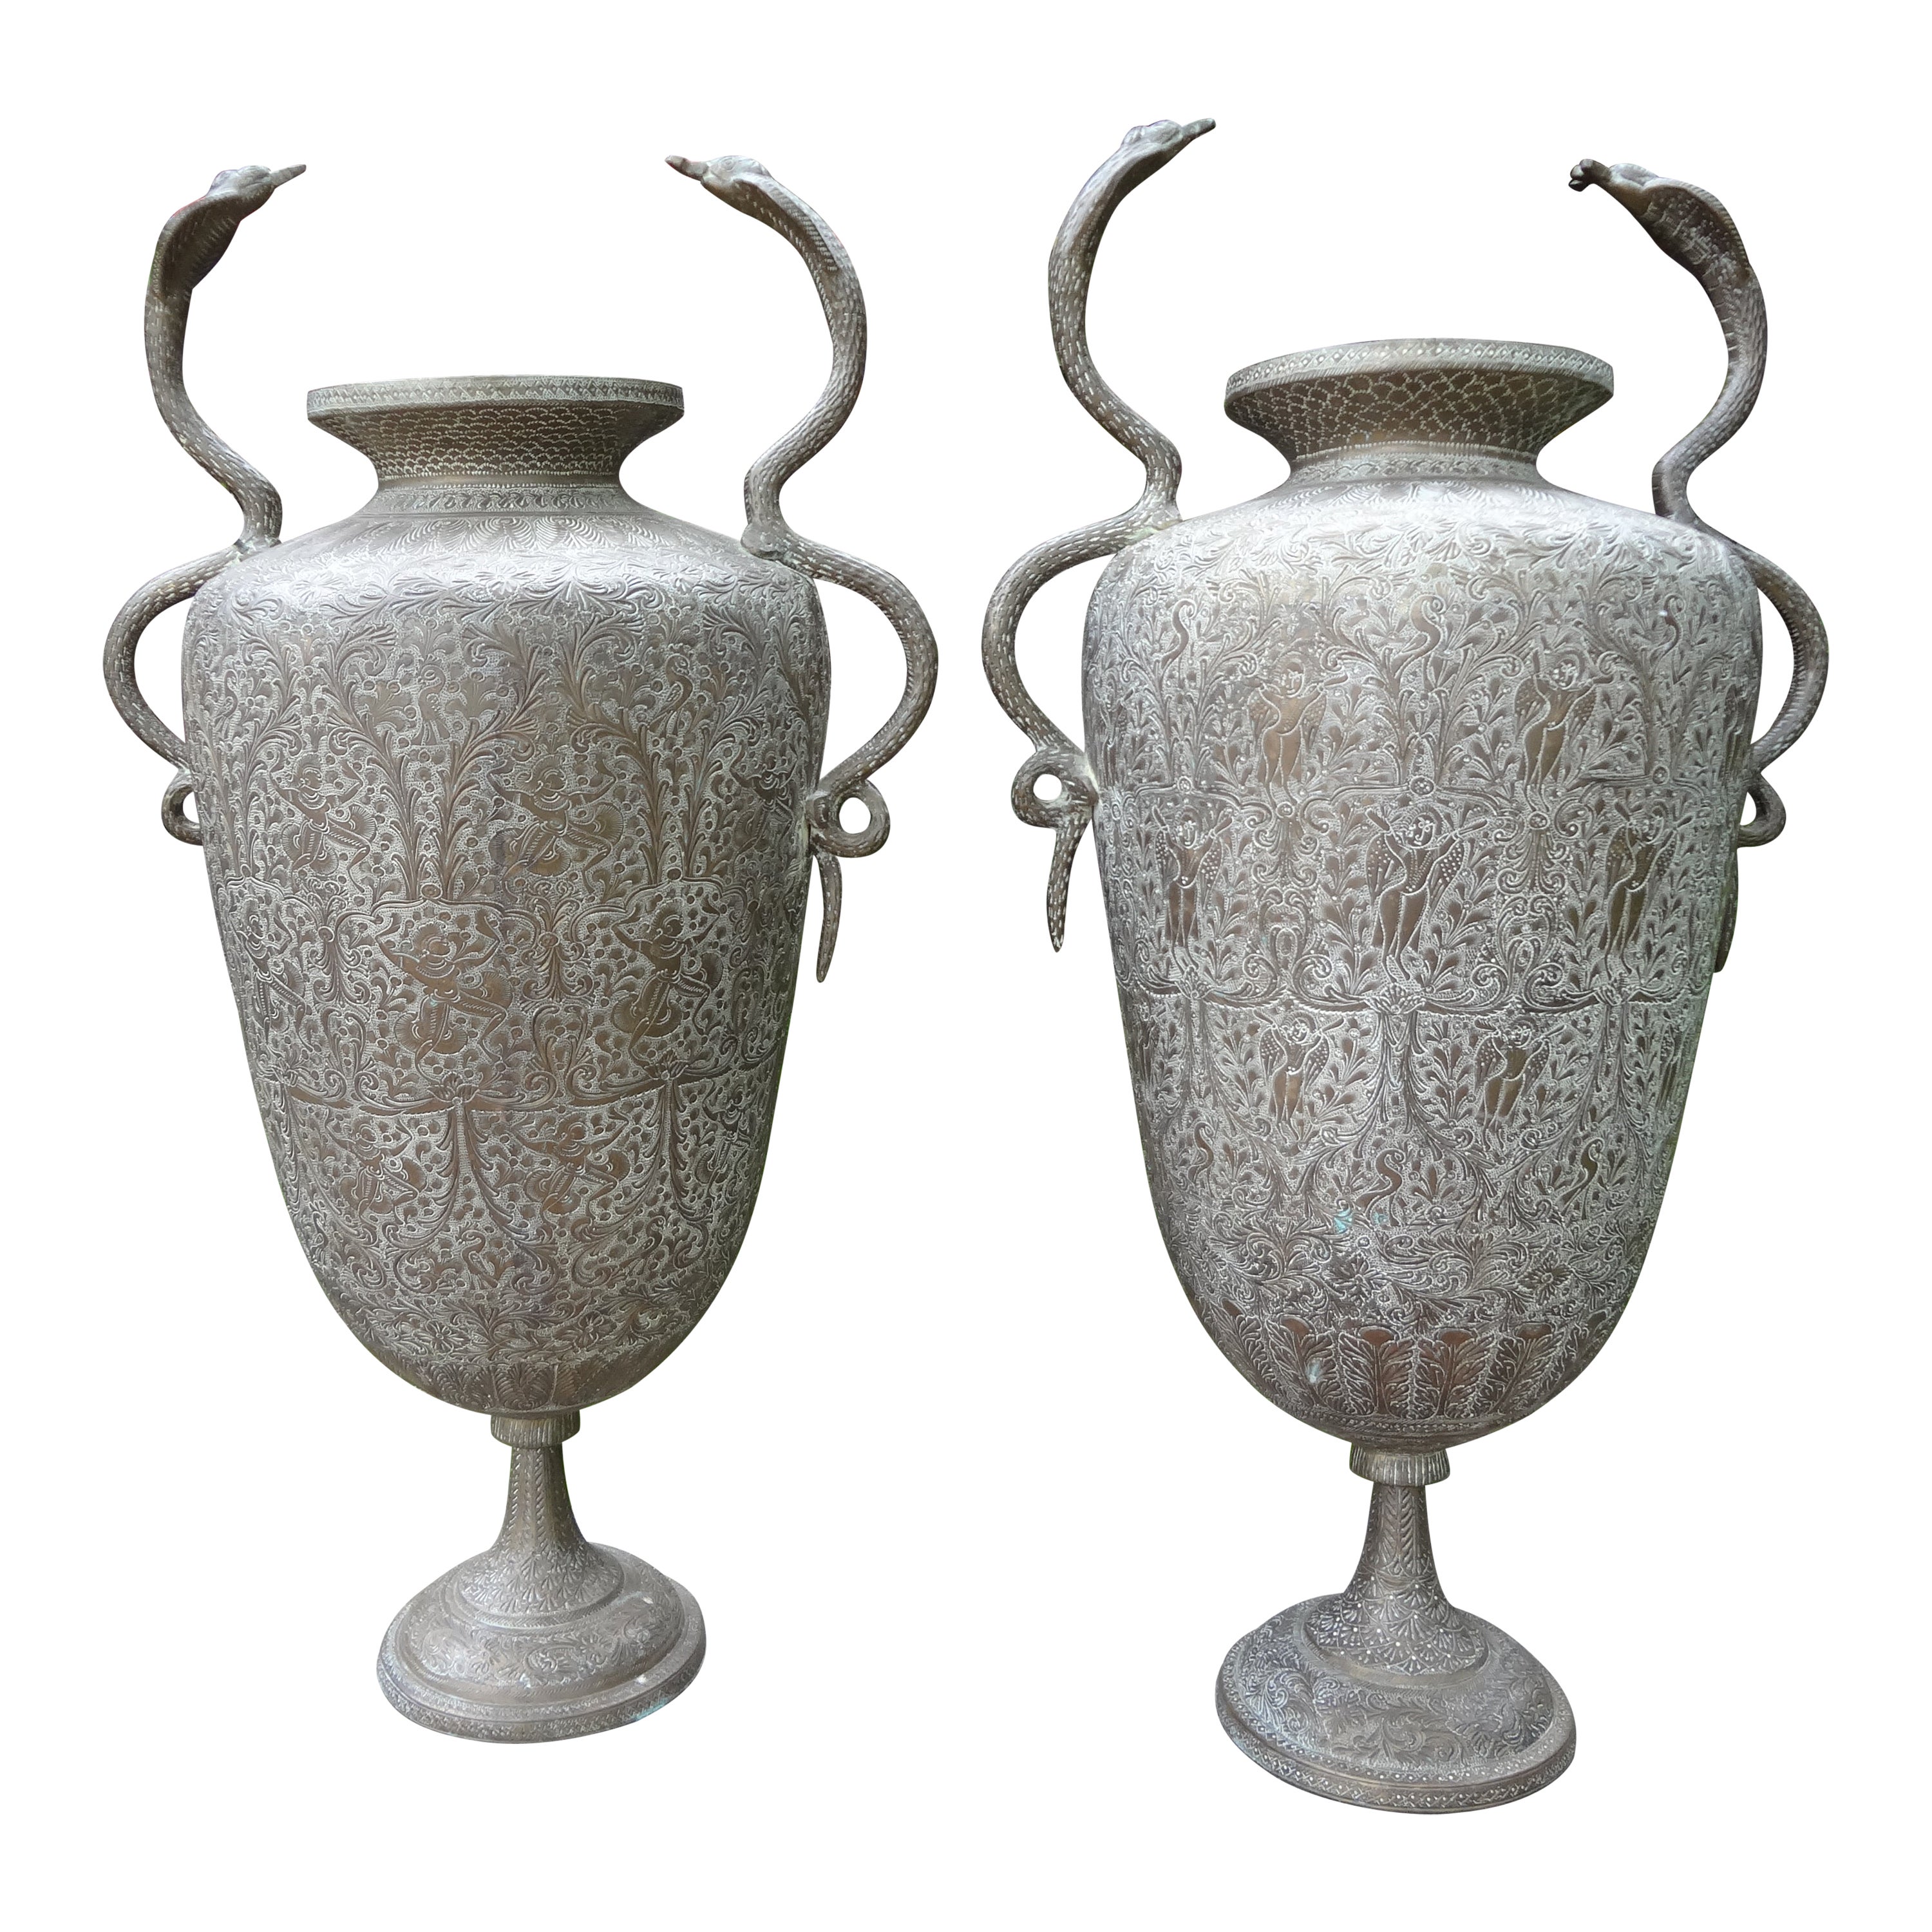 Pair Of Anglo-Indian Brass Urns With Cobras For Sale